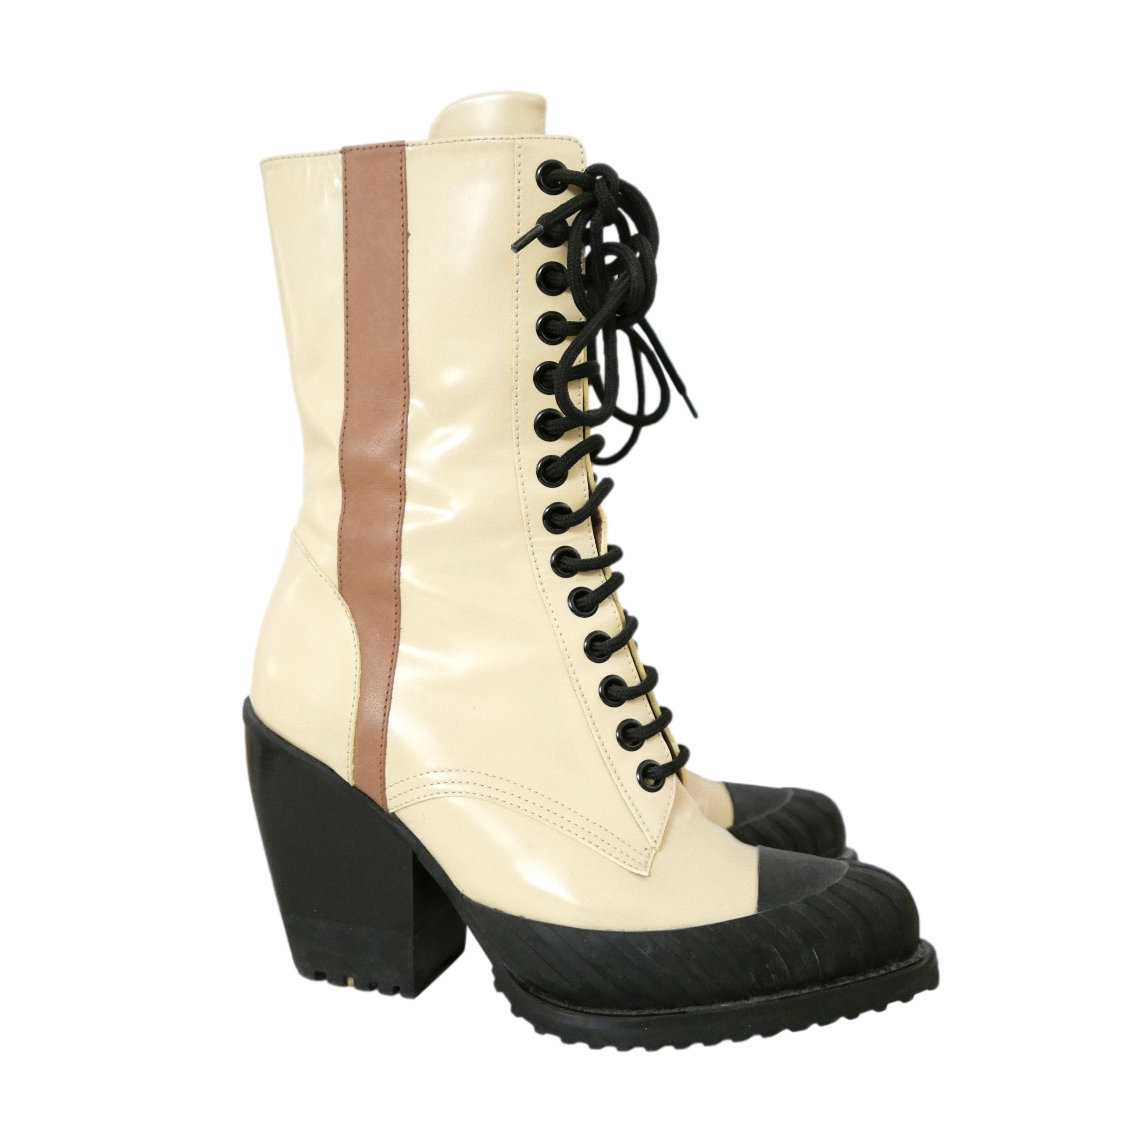 Chloe Rylee Cream Leather Lace Up Heeled Ankle Boots